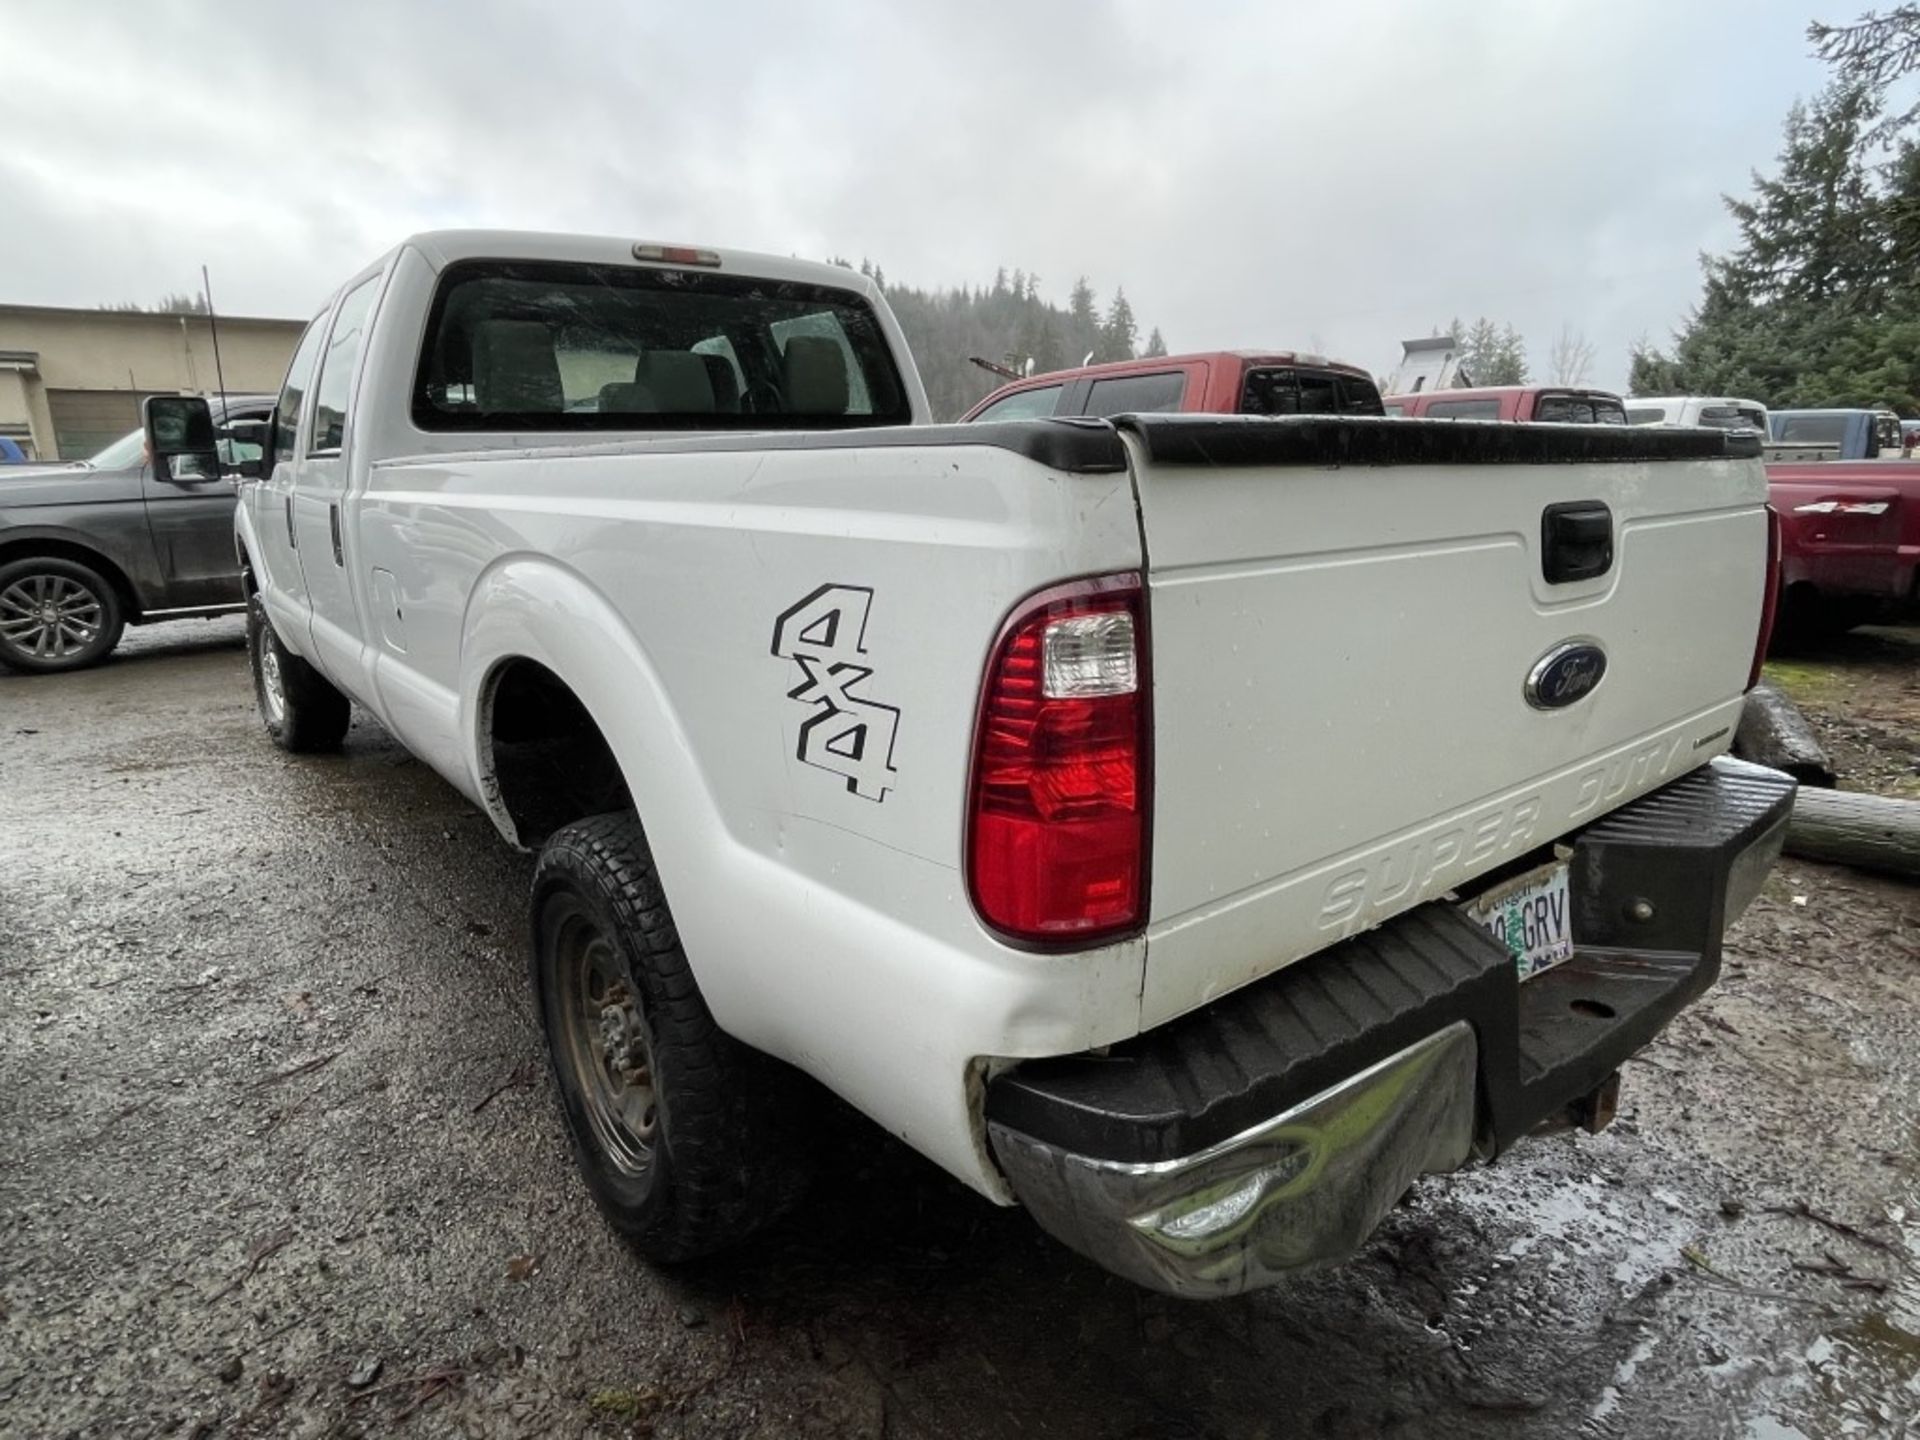 2014 Ford F350 SD 4x4 Crew Cab Pickup - Image 6 of 15